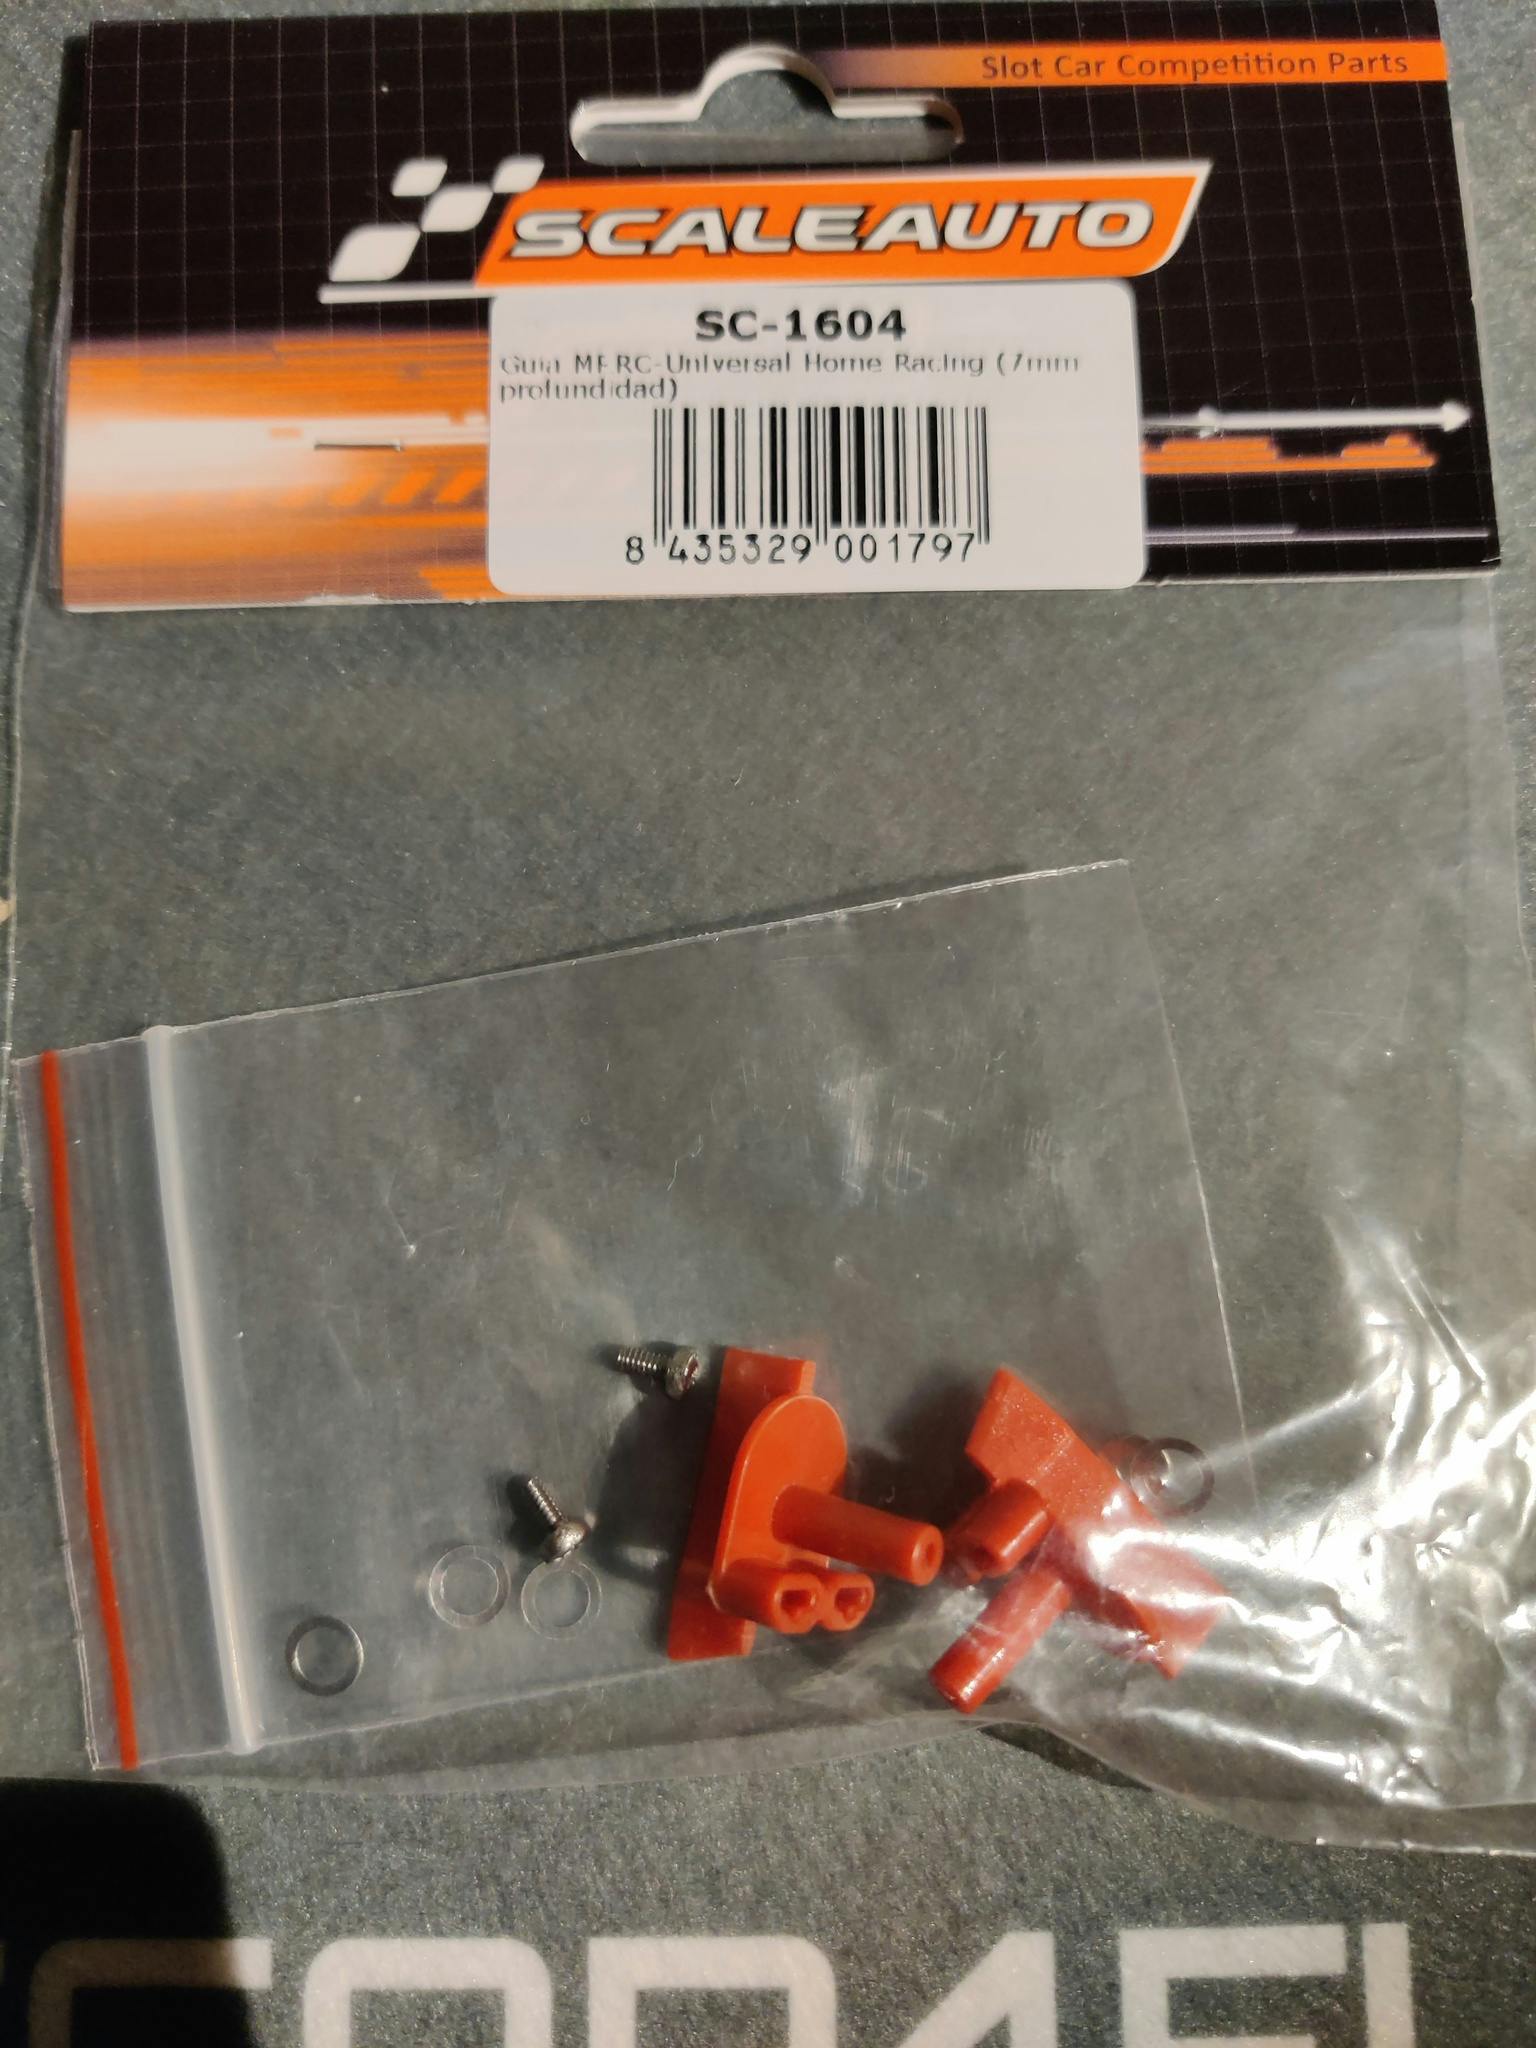 Scaleauto - Guide Universal Home Racing (7mm depth/djup) x2